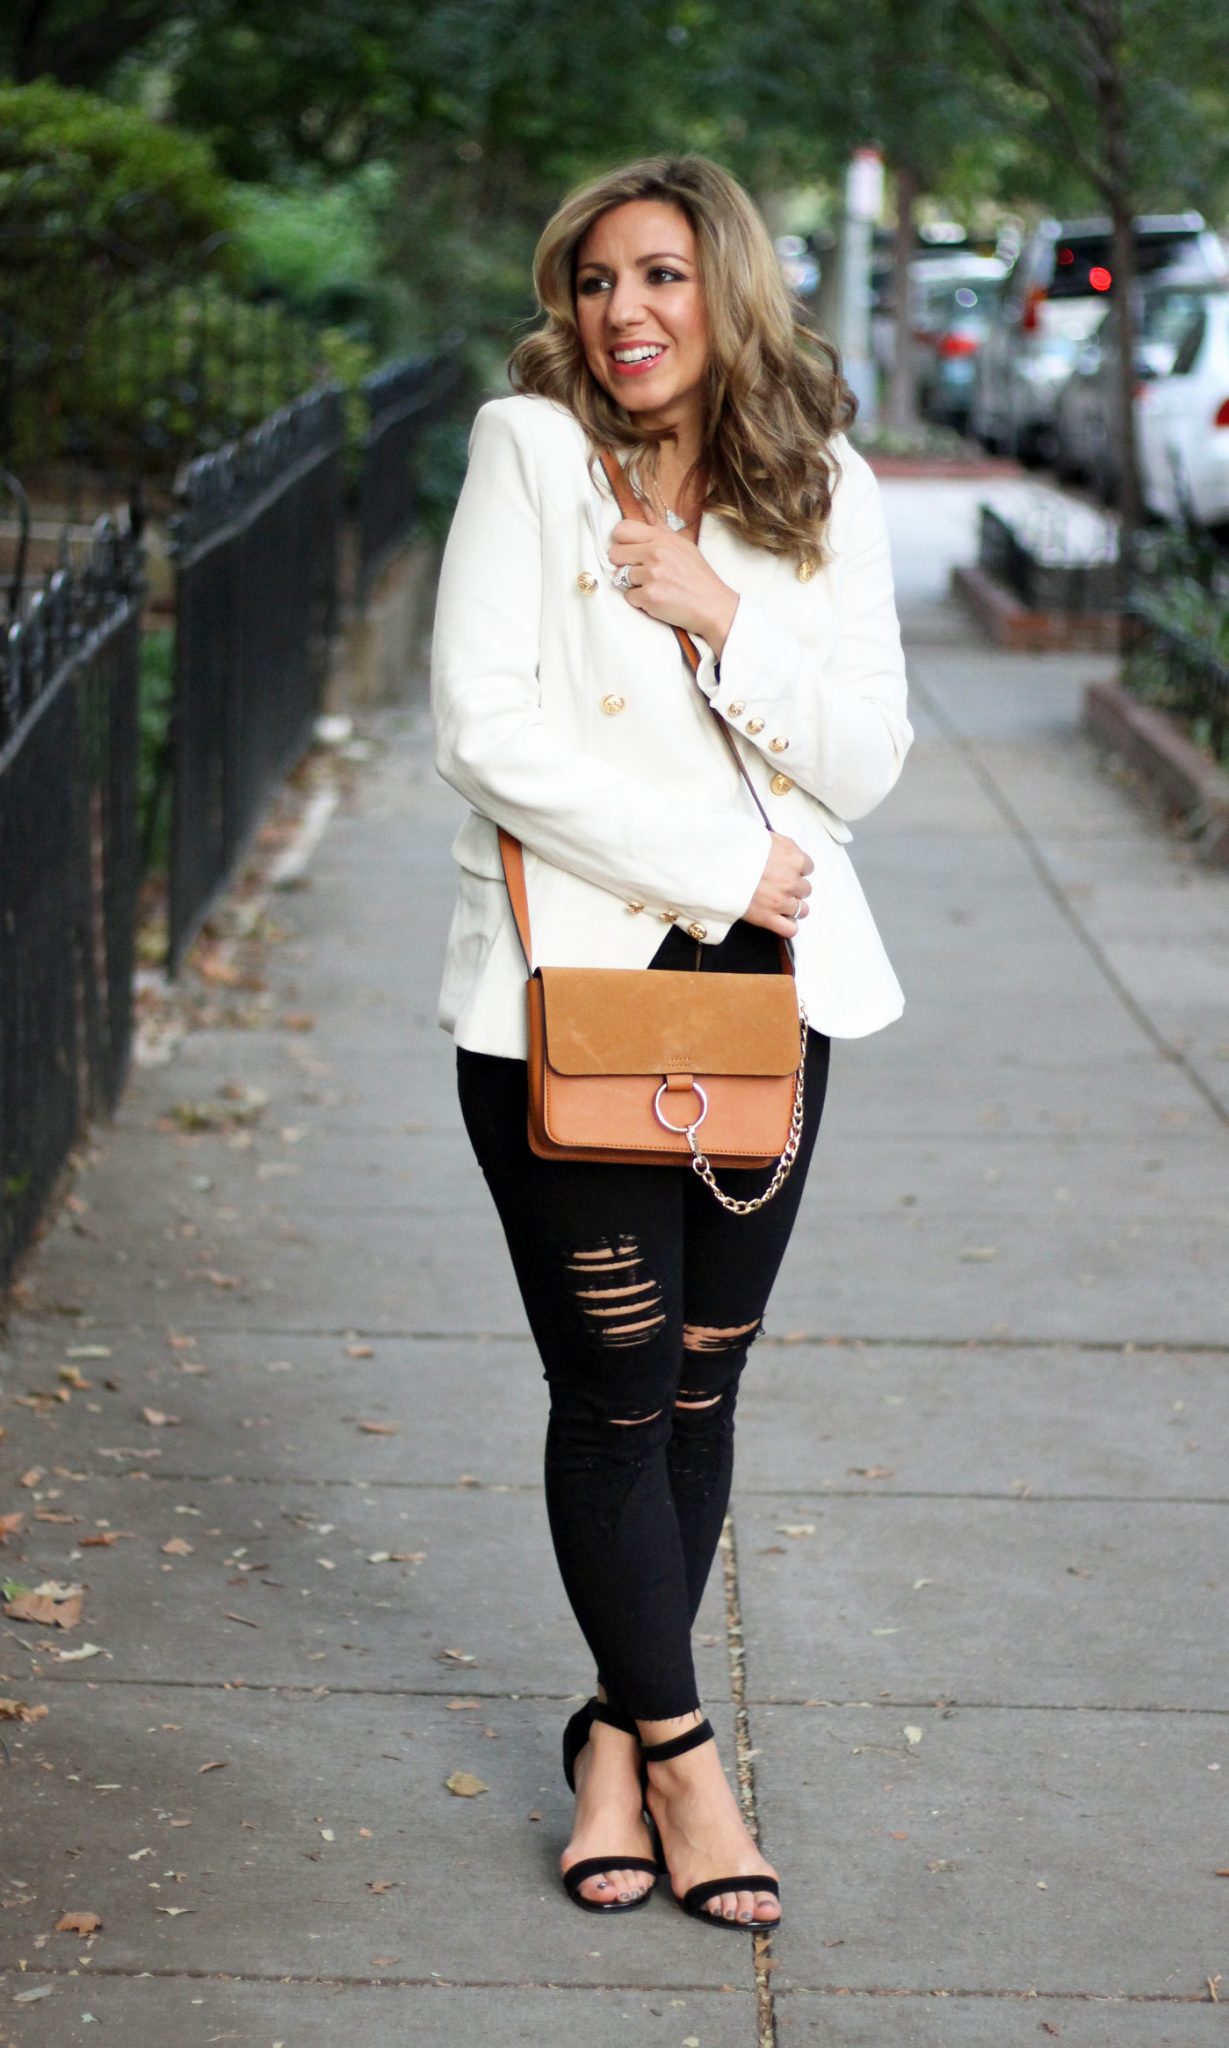 White Blazer for Date Night and Zaful Accessories